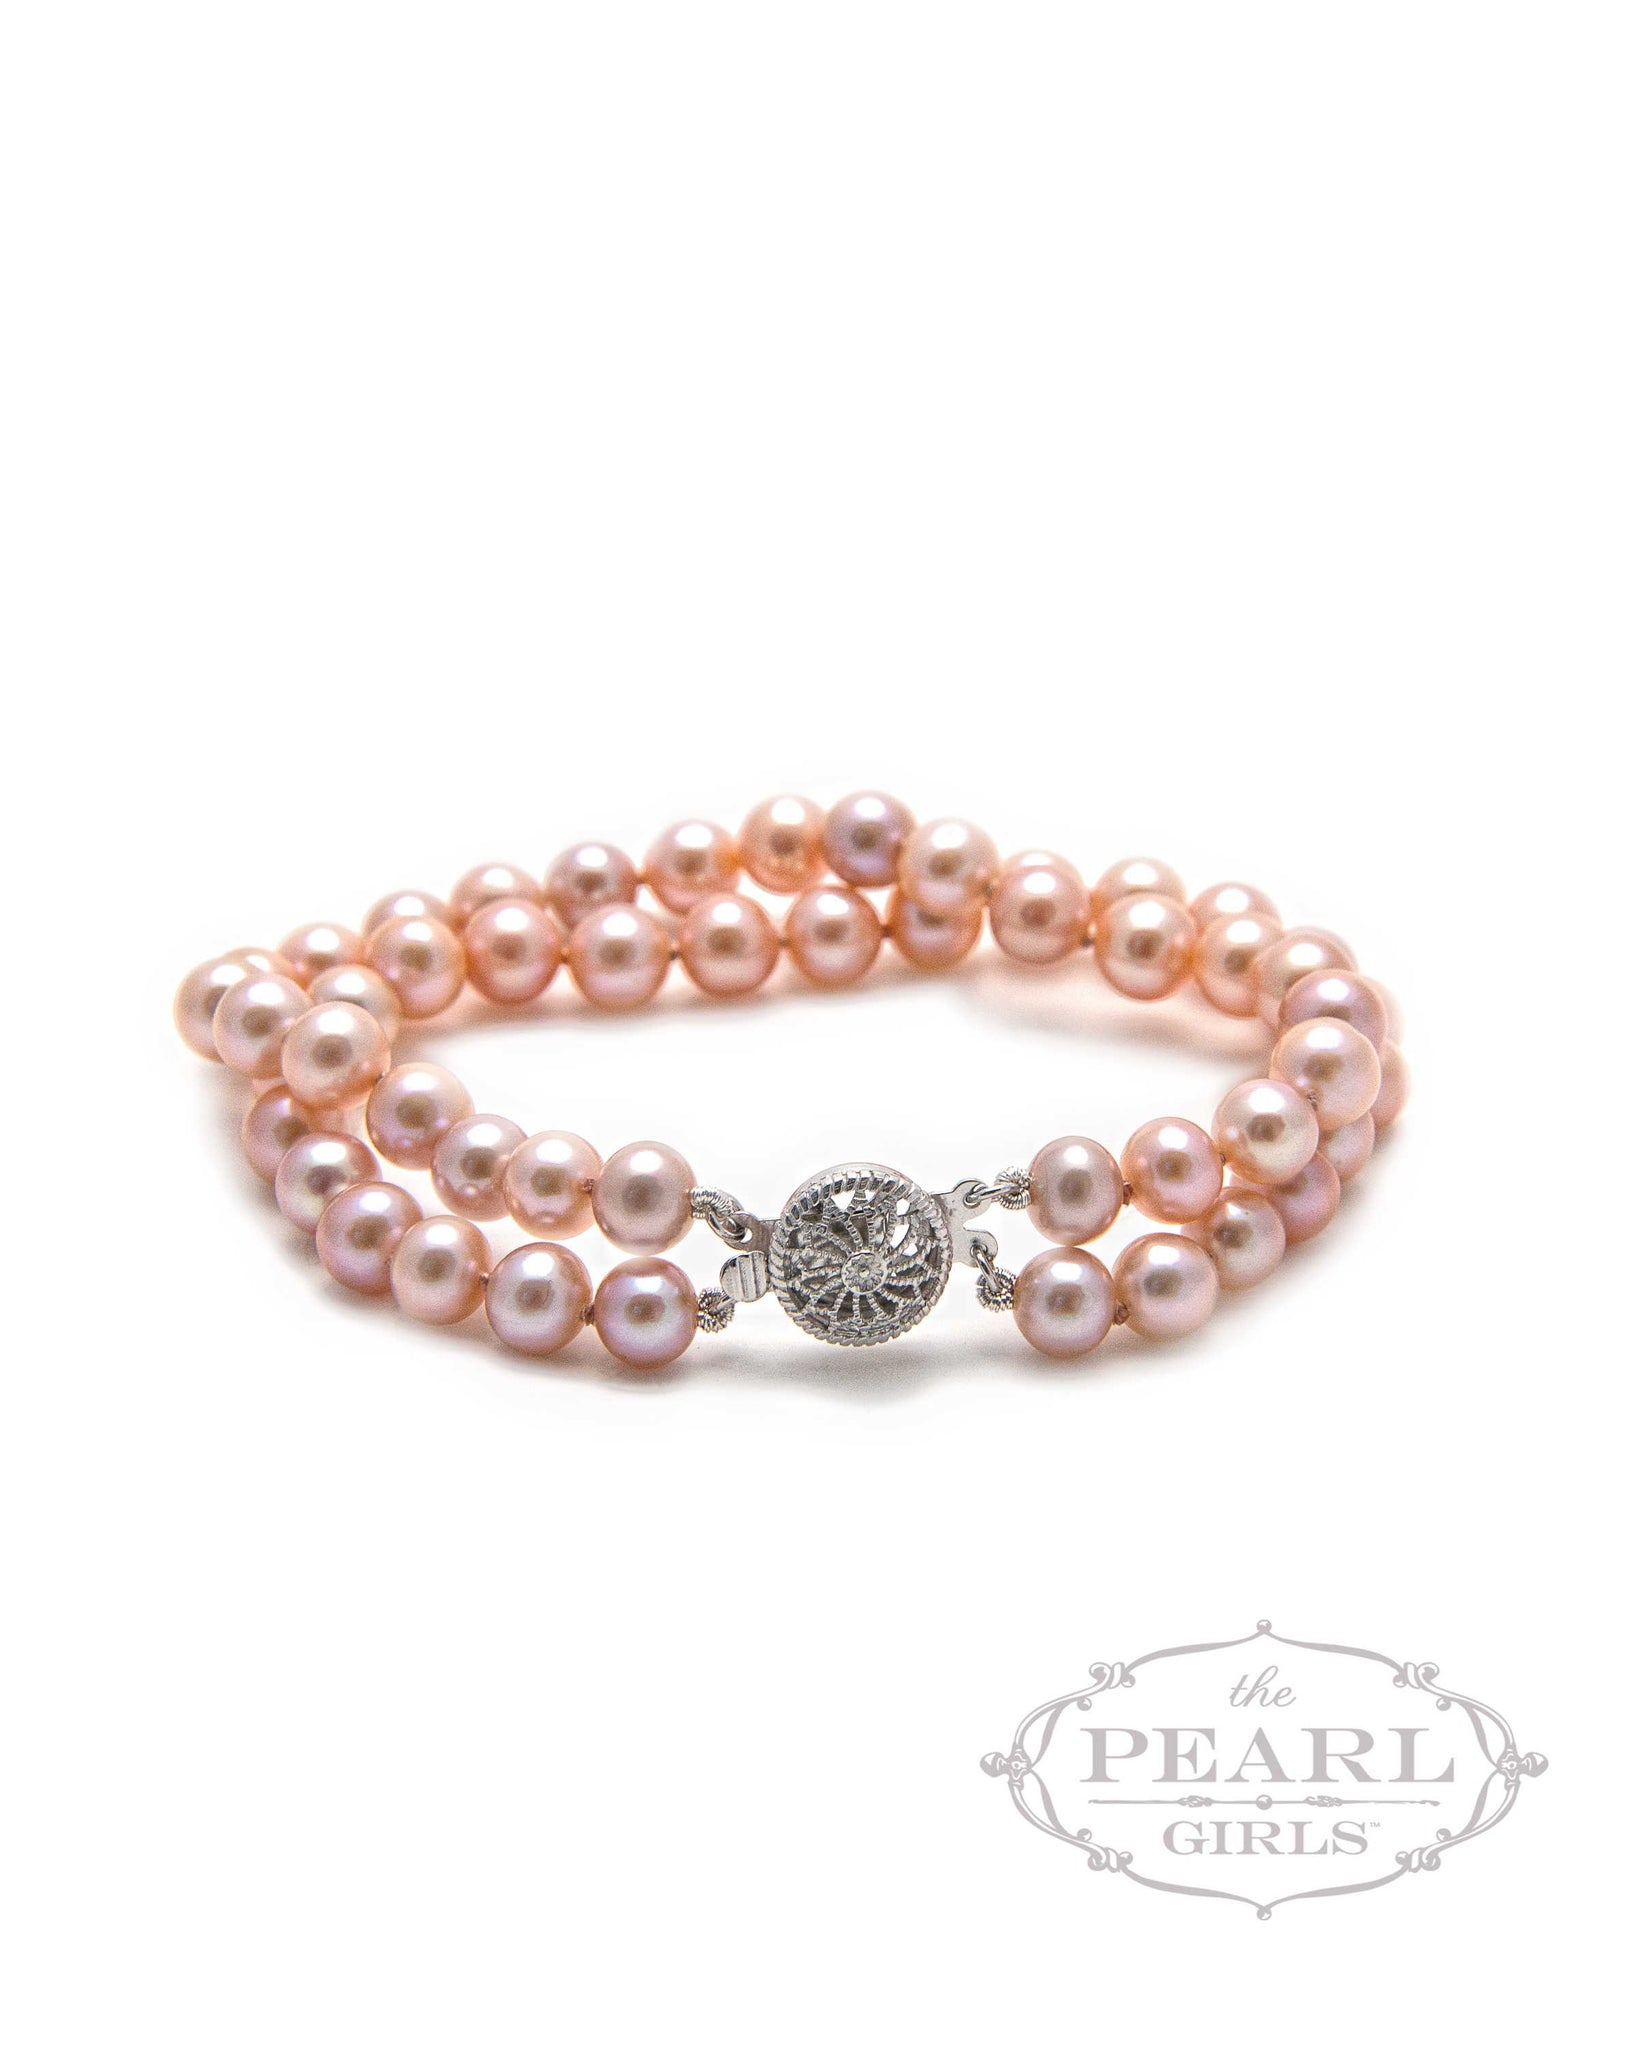 classic double strand pink pearl bracelet, the pearl girls, southern pearl jewelry, essential pearl jewelry, real pearl jewelry, cultured pearl bracelet, blush pink pearls, freshwater pearls, hand knotted pearl jewelry